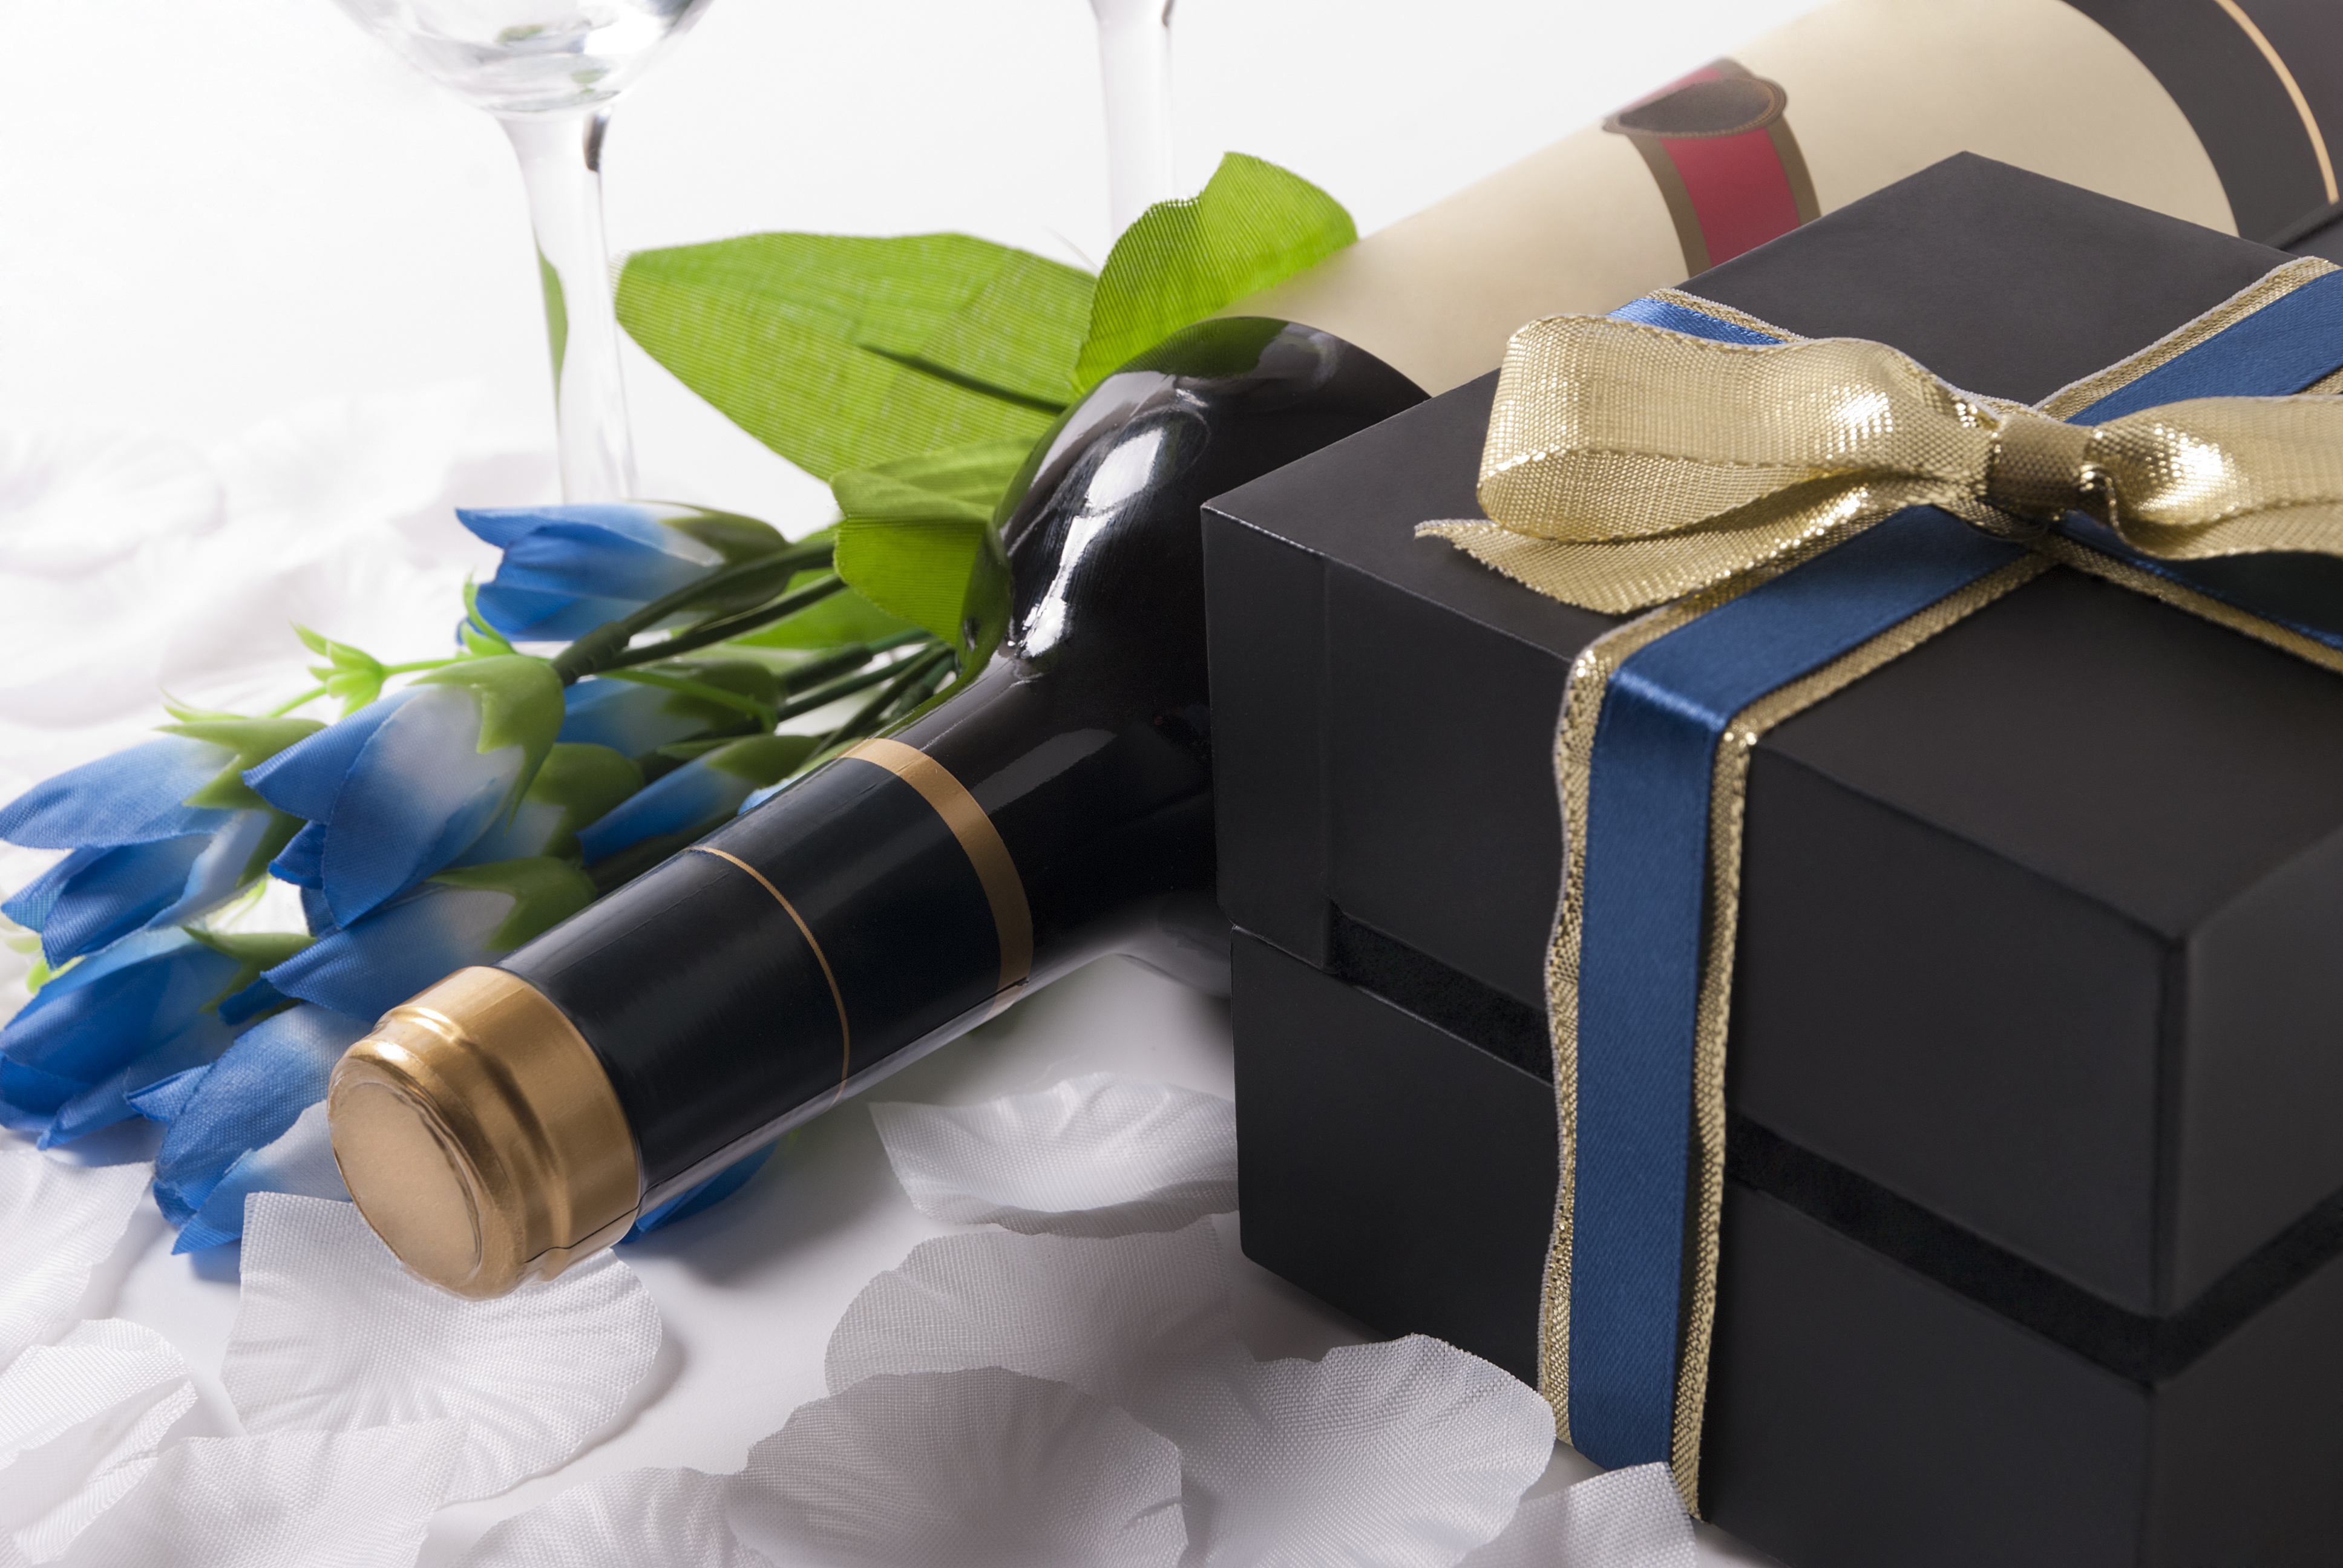 Top Gift Ideas for the Wine Lovers in Your Life